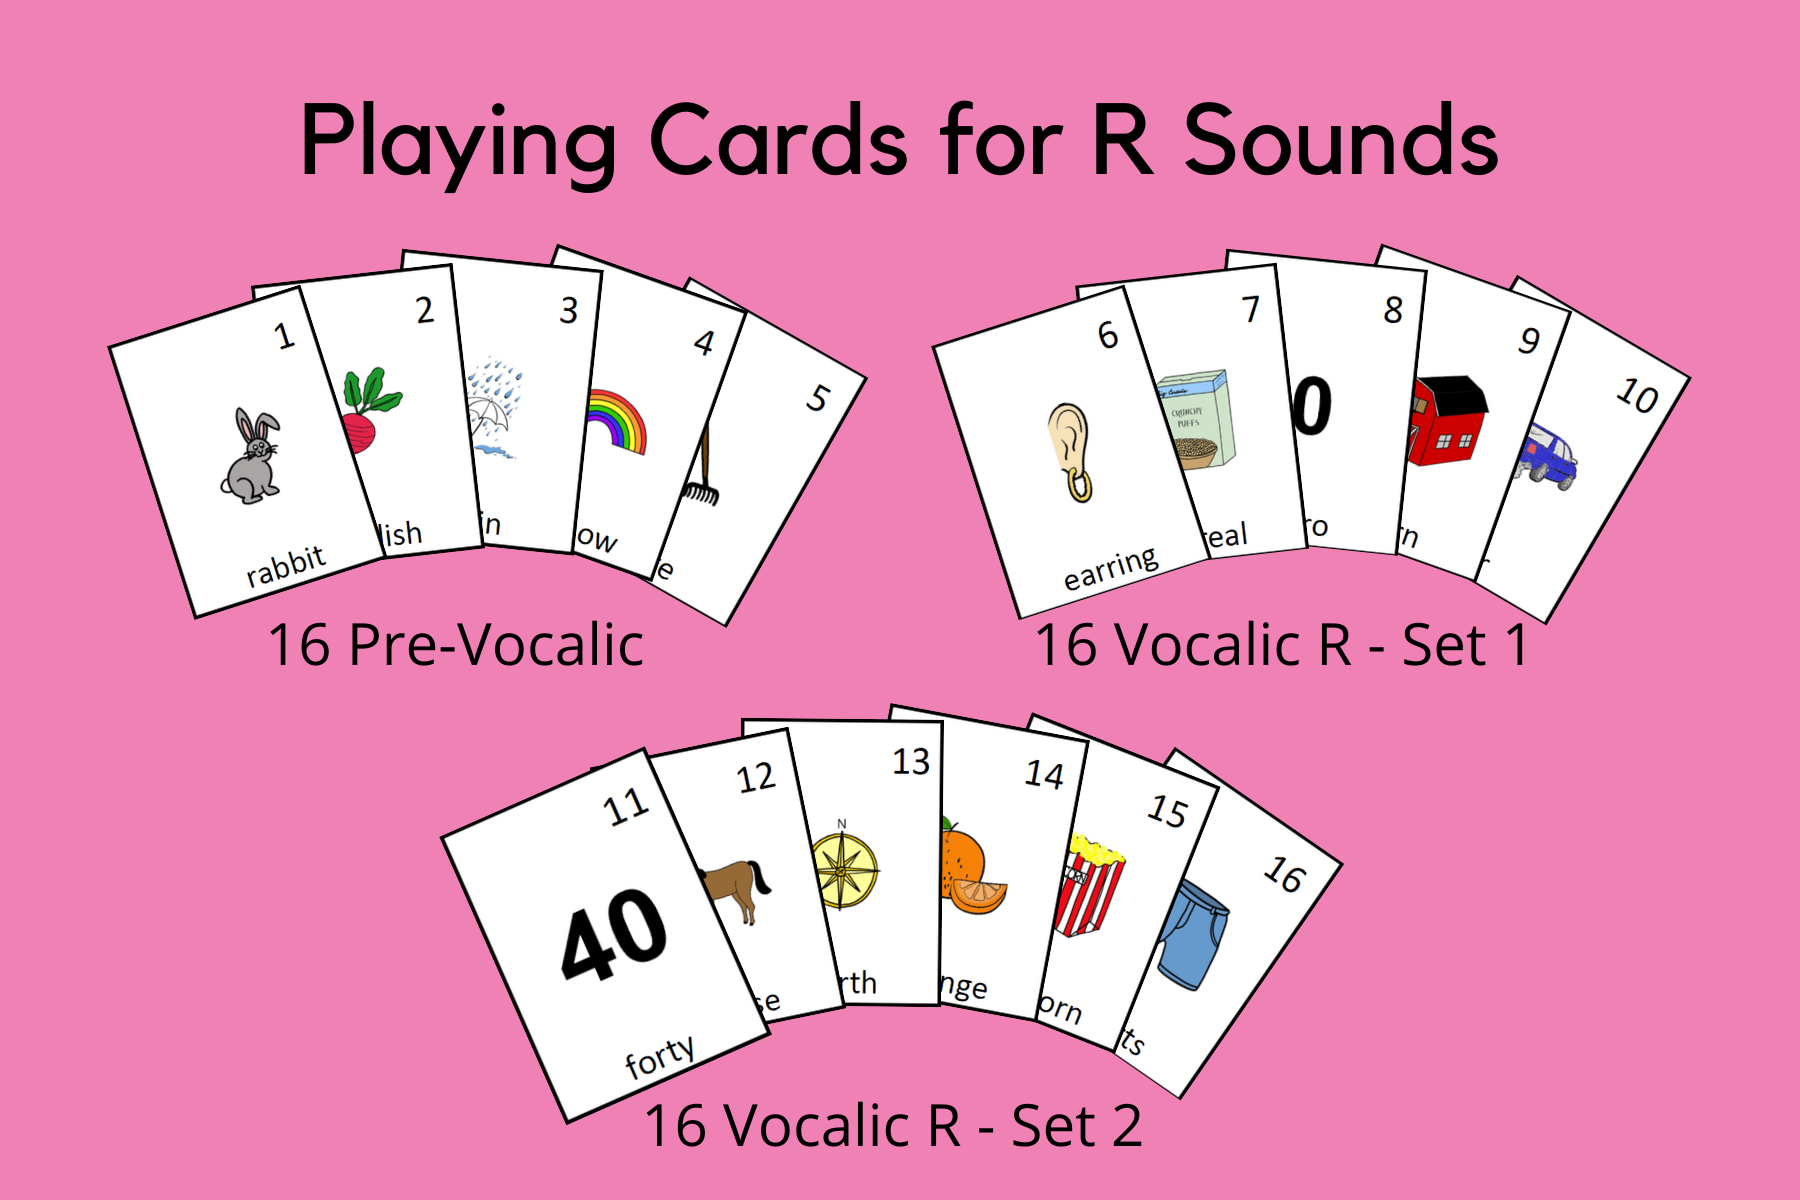 Playing Cards for R Sounds